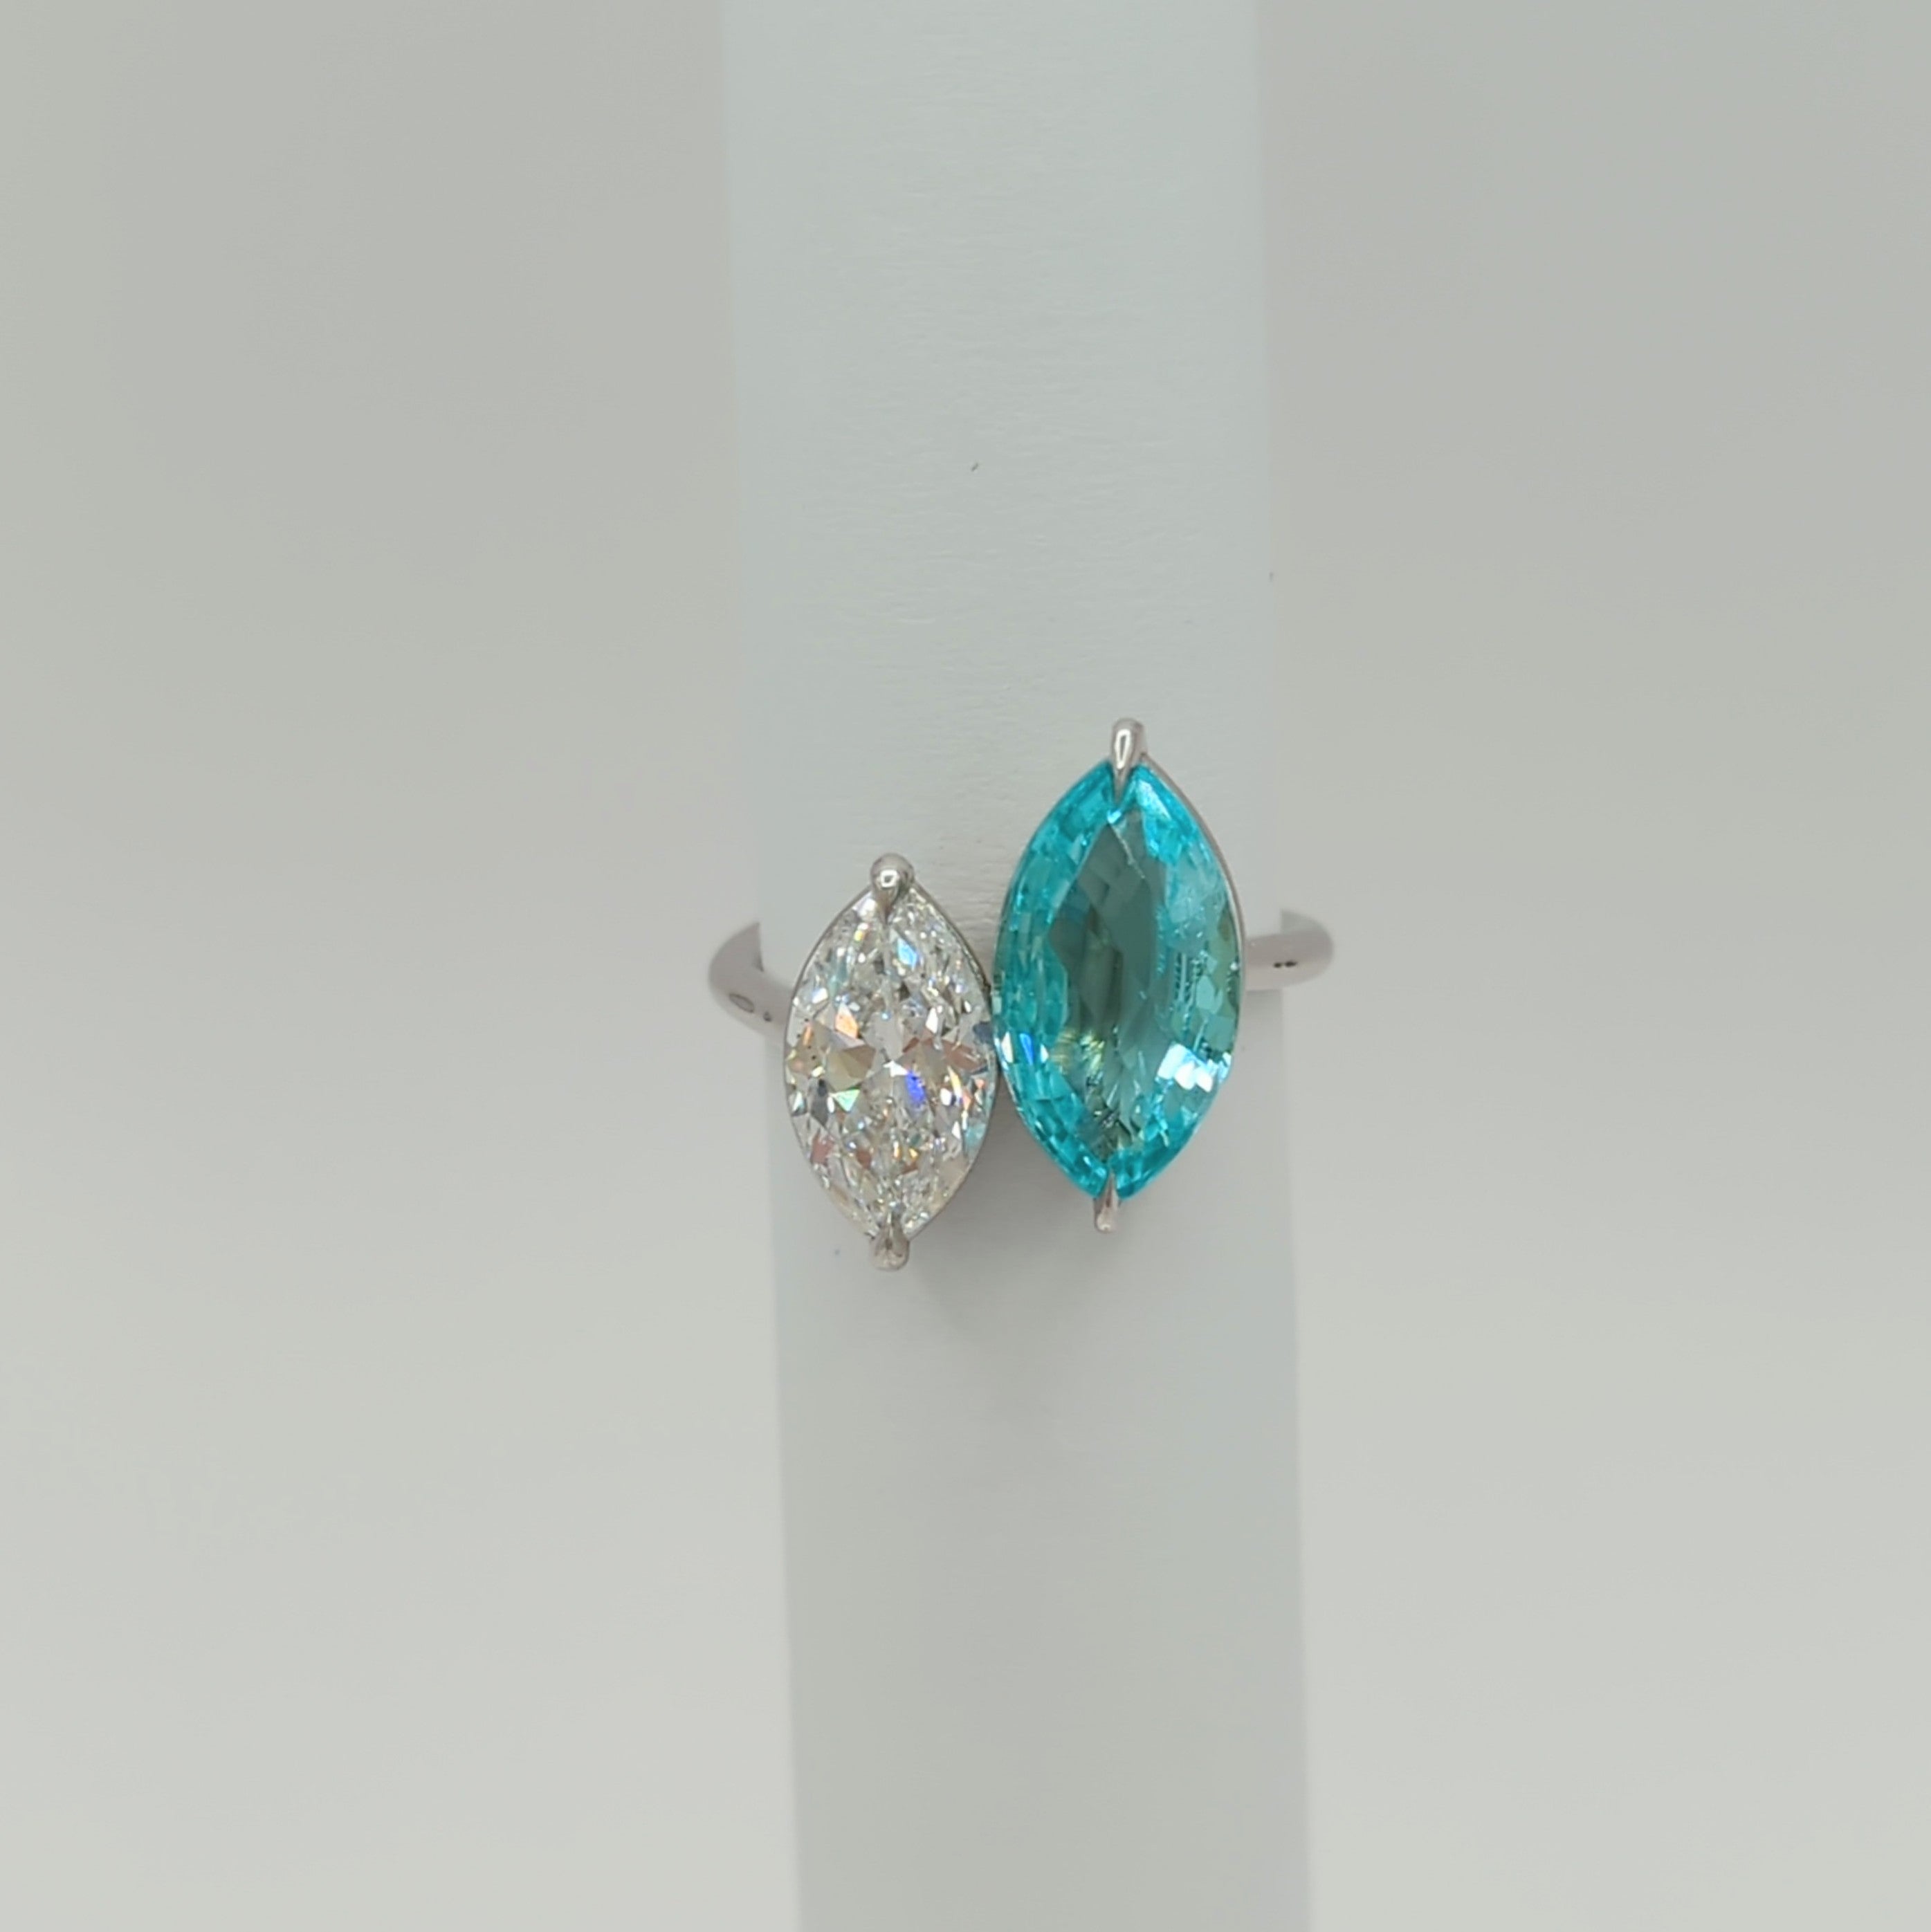 Stunning 3.00 ct. paraiba tourmaline marquise with a 1.52 ct. D SI2 white diamond marquise.  This Toi et Moi ring is so unique and fun.  Handmade in platinum.  Ring size 6.5.  GIA certificates included.